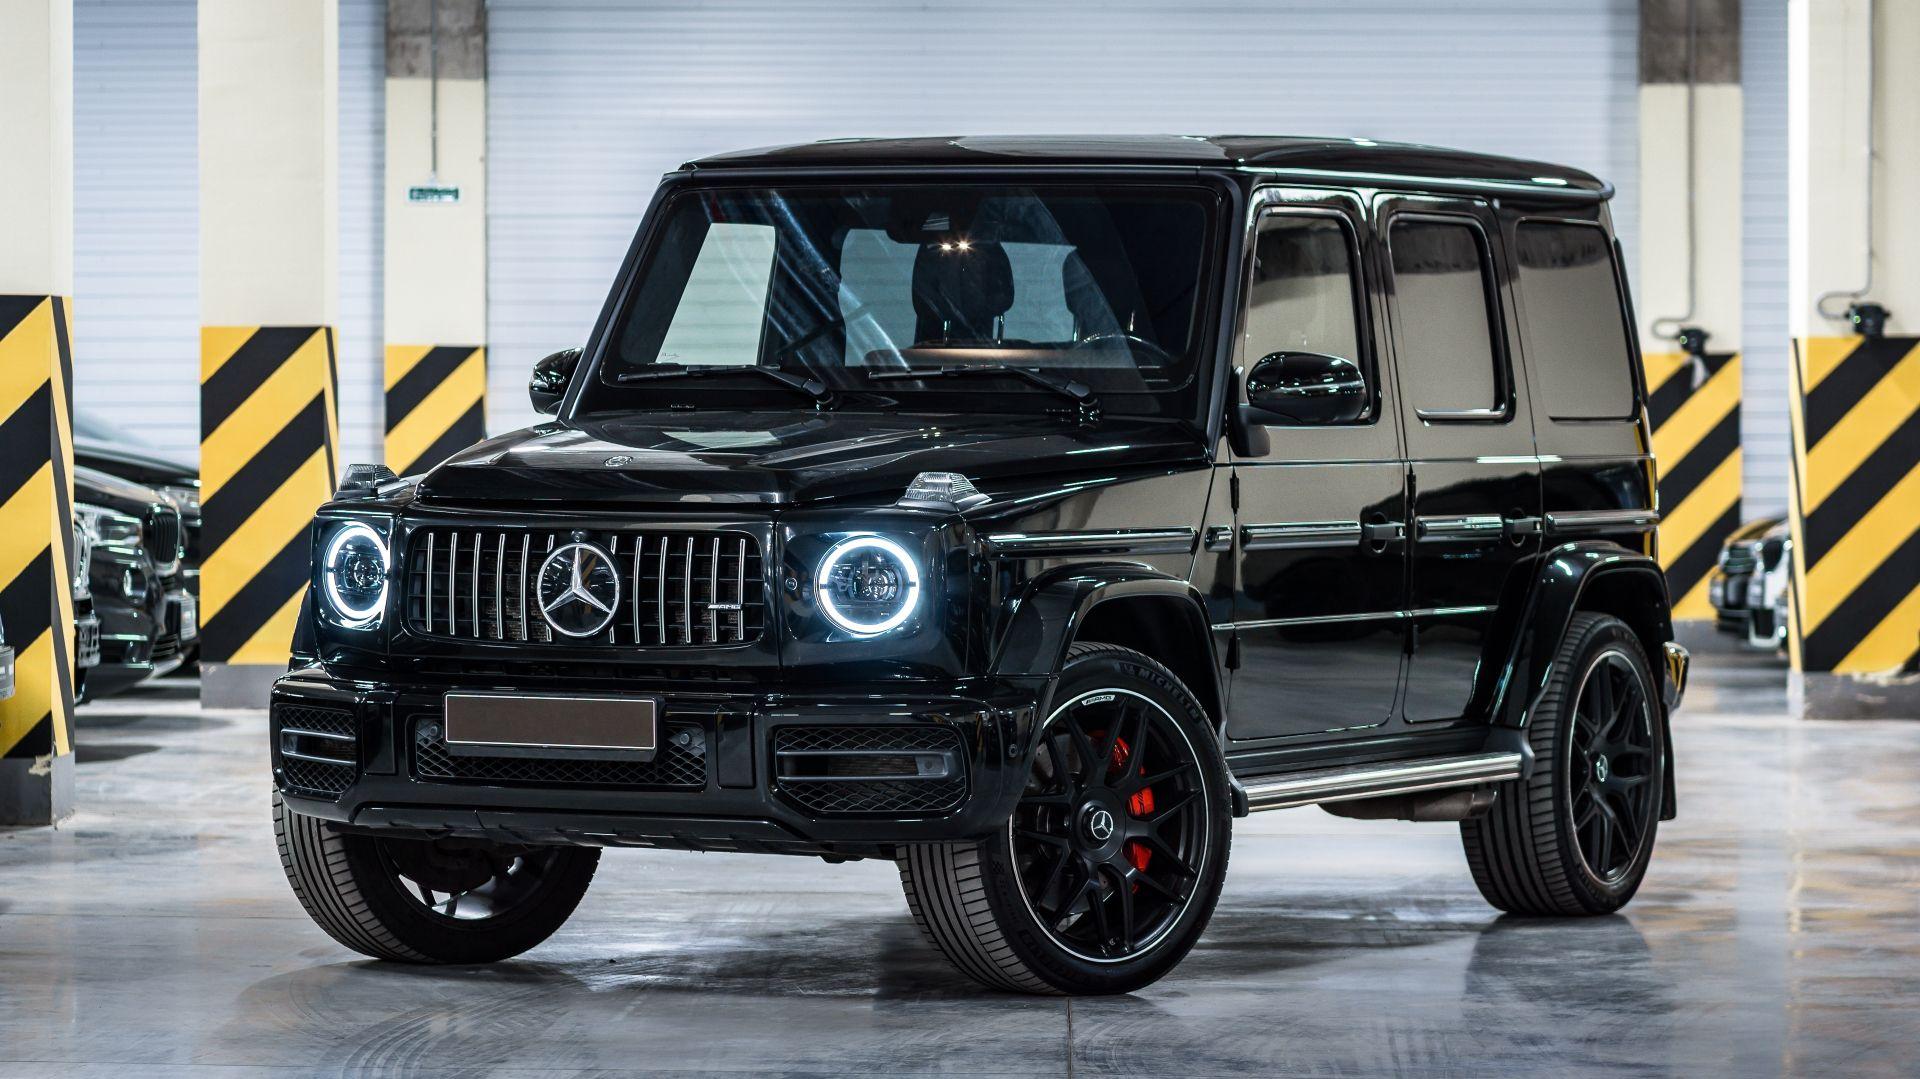 Fun Facts You Need To Know About The Mercedes G Wagen